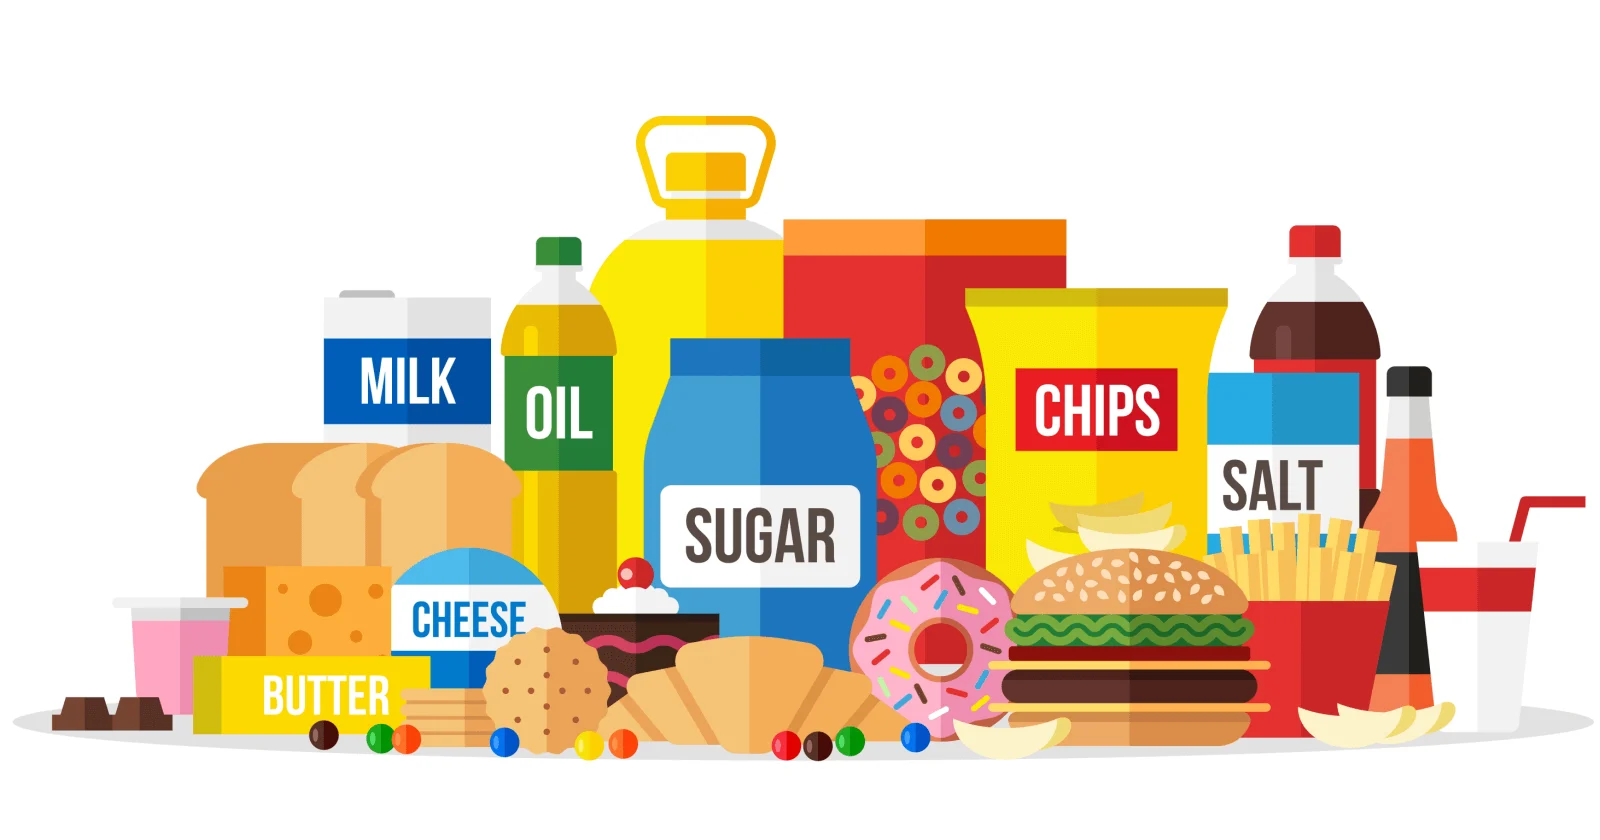 The impact of processed foods on health and how to make healthier choices
